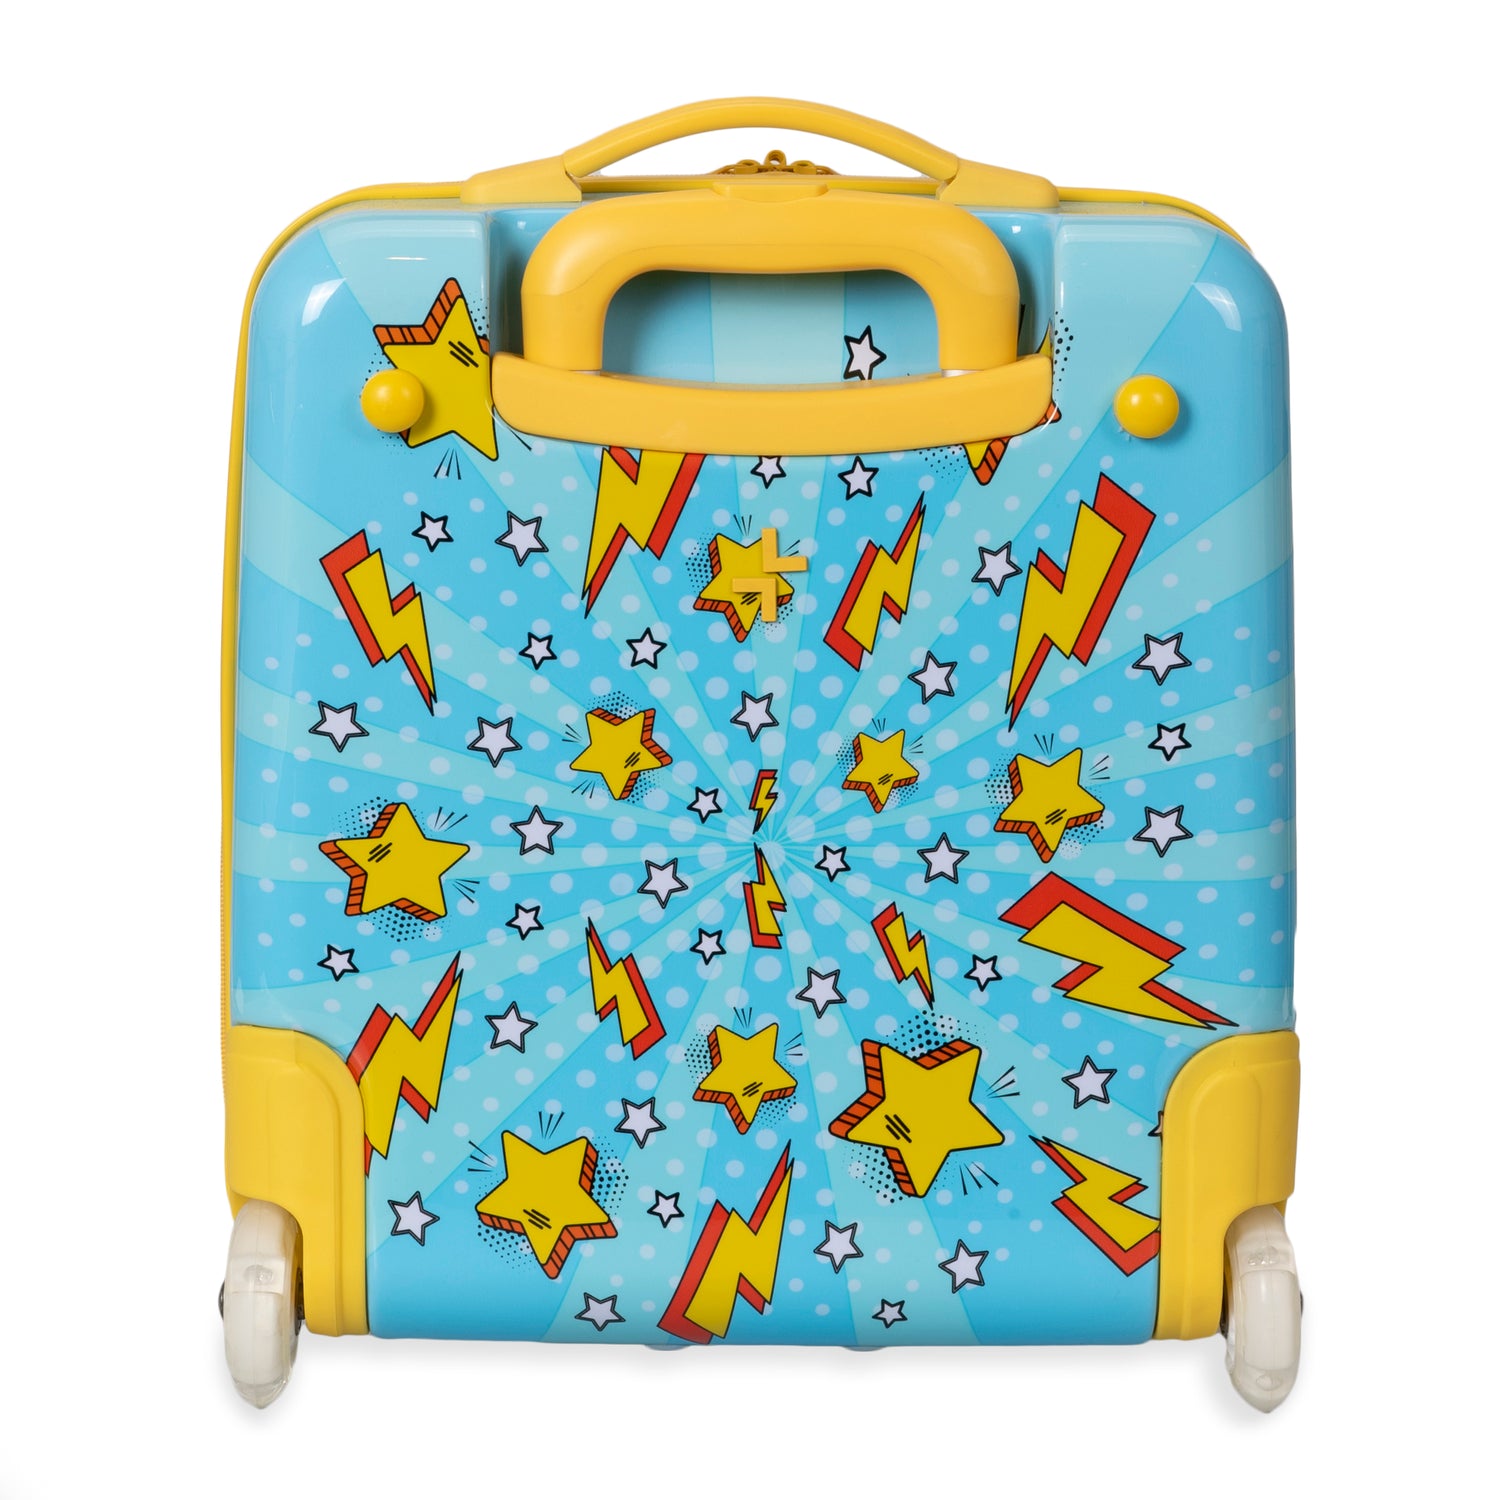 Backside of a blue and yellow, lightning and star-print kids luggage designed by Triforce on a white background.